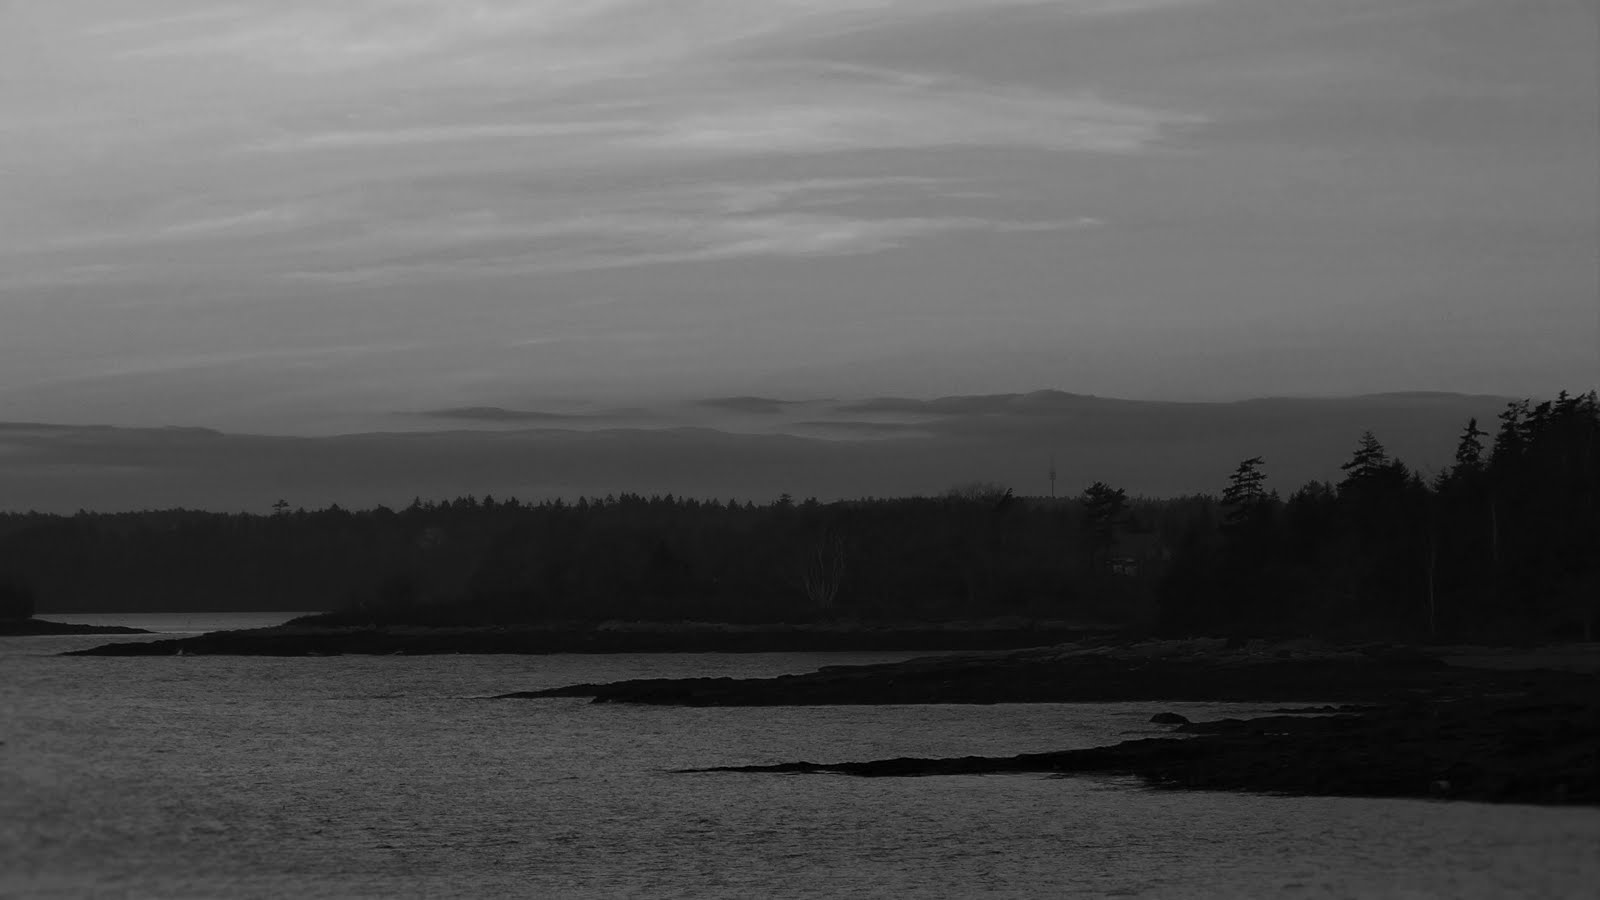 Sunset: Cundy's Point, Harpswell, Maine